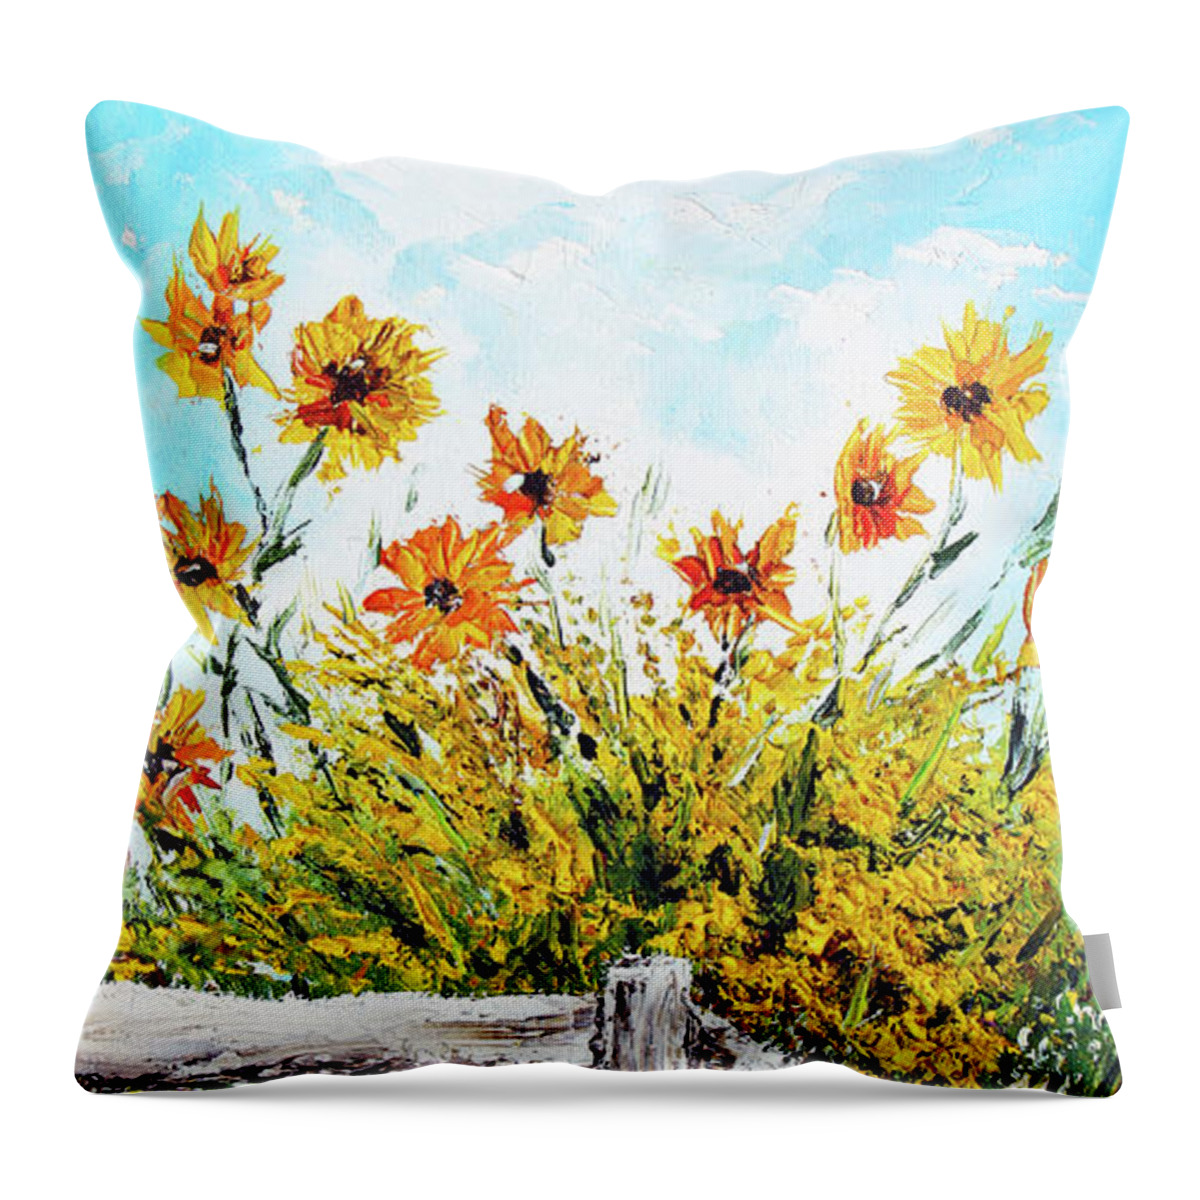 Summer Throw Pillow featuring the painting Overflowing Joy by Meaghan Troup